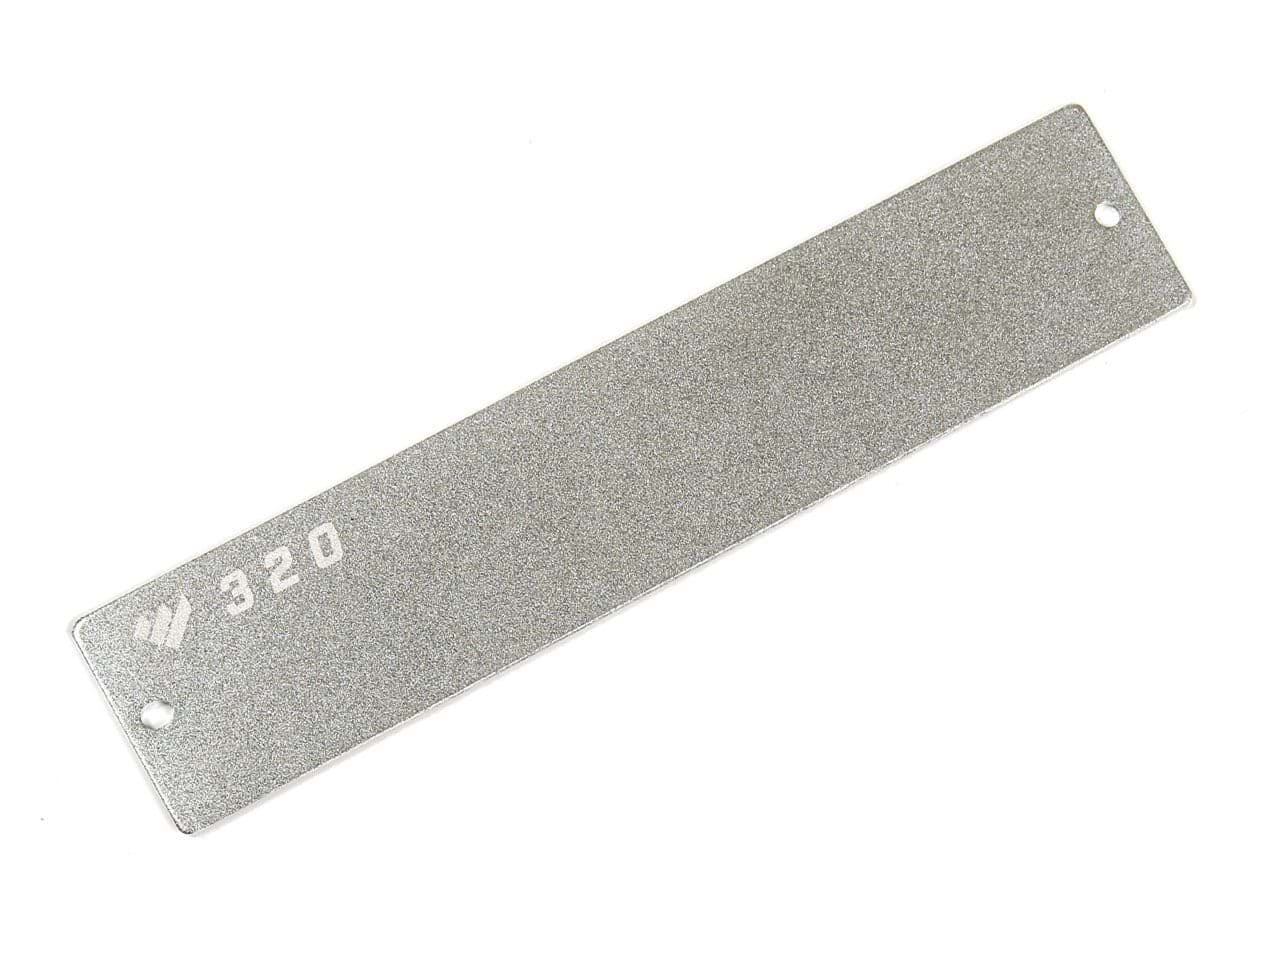 Picture of Work Sharp - Guided Sharpening System with 320 Grit Plate